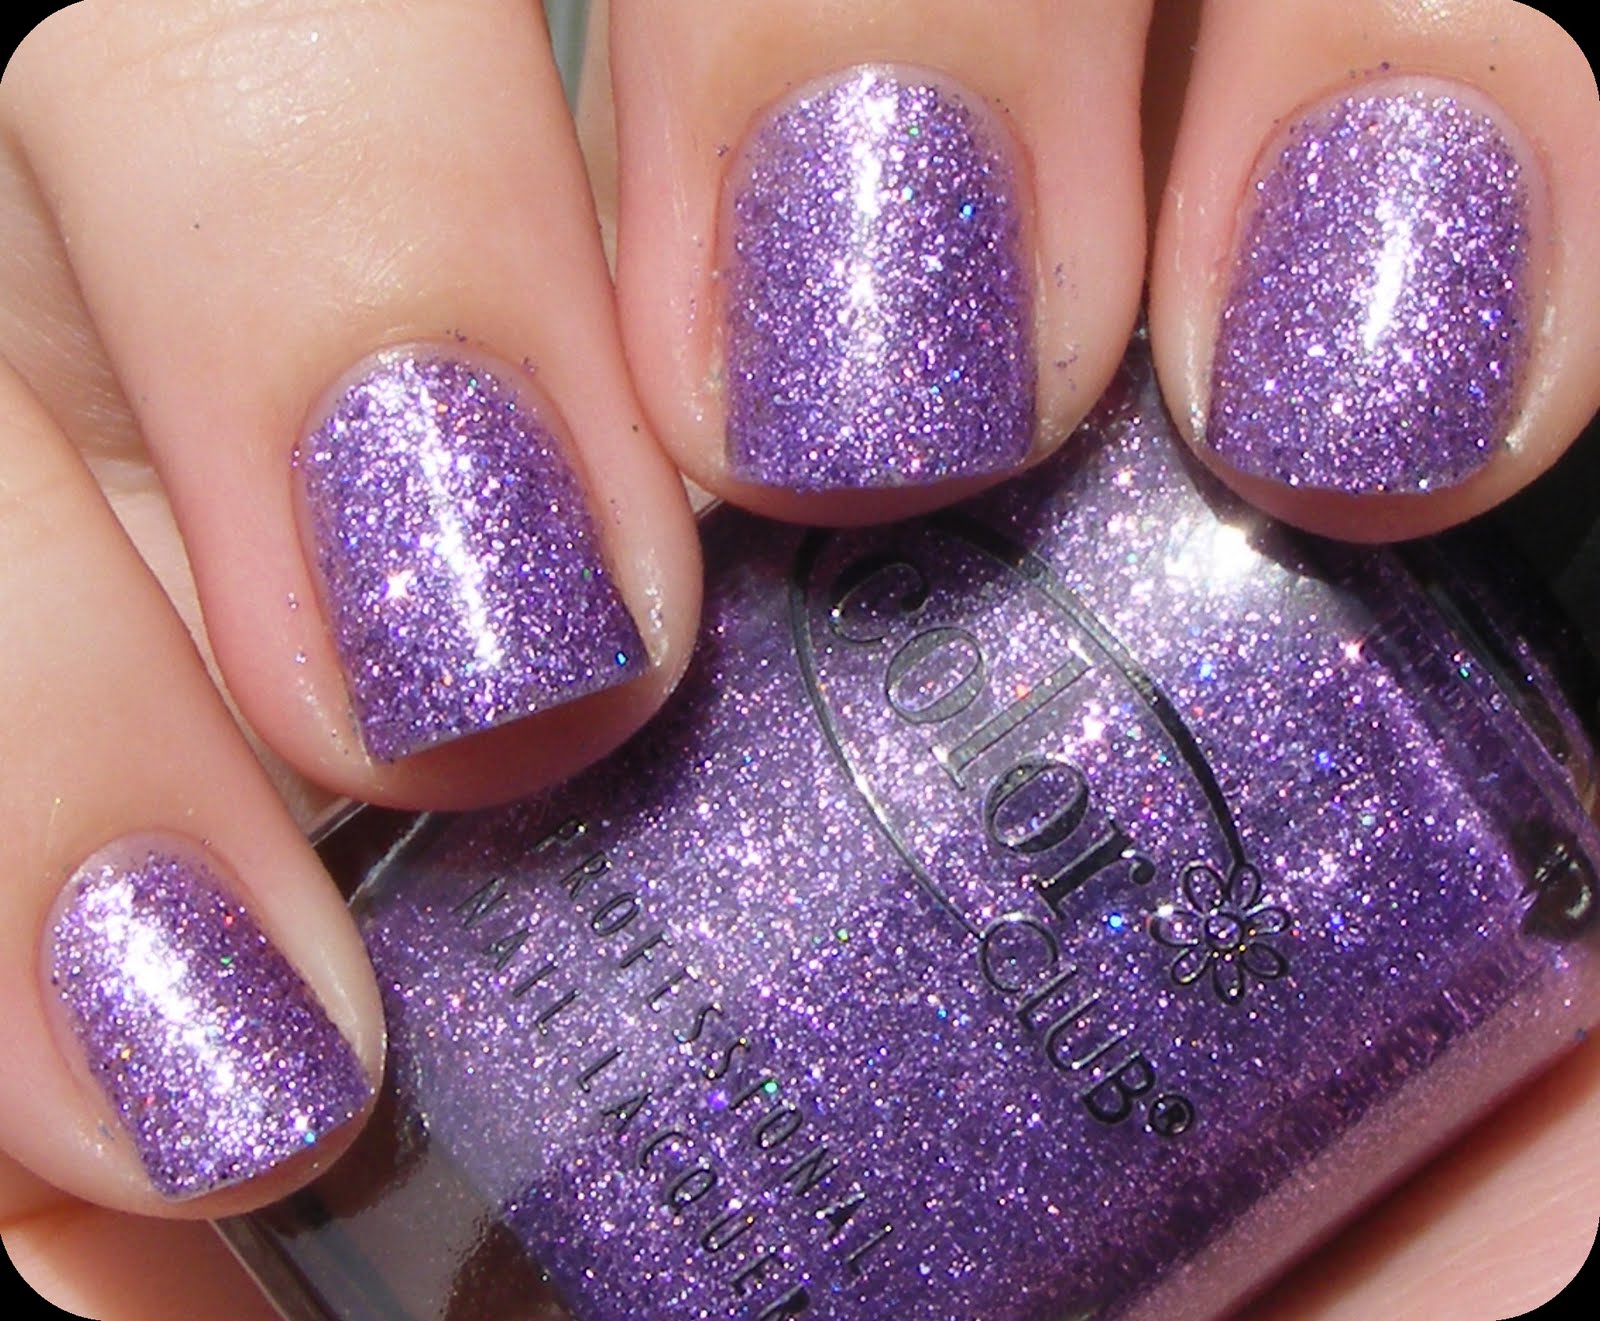 5. "Frosted Lilac" pastel purple nail polish - wide 8